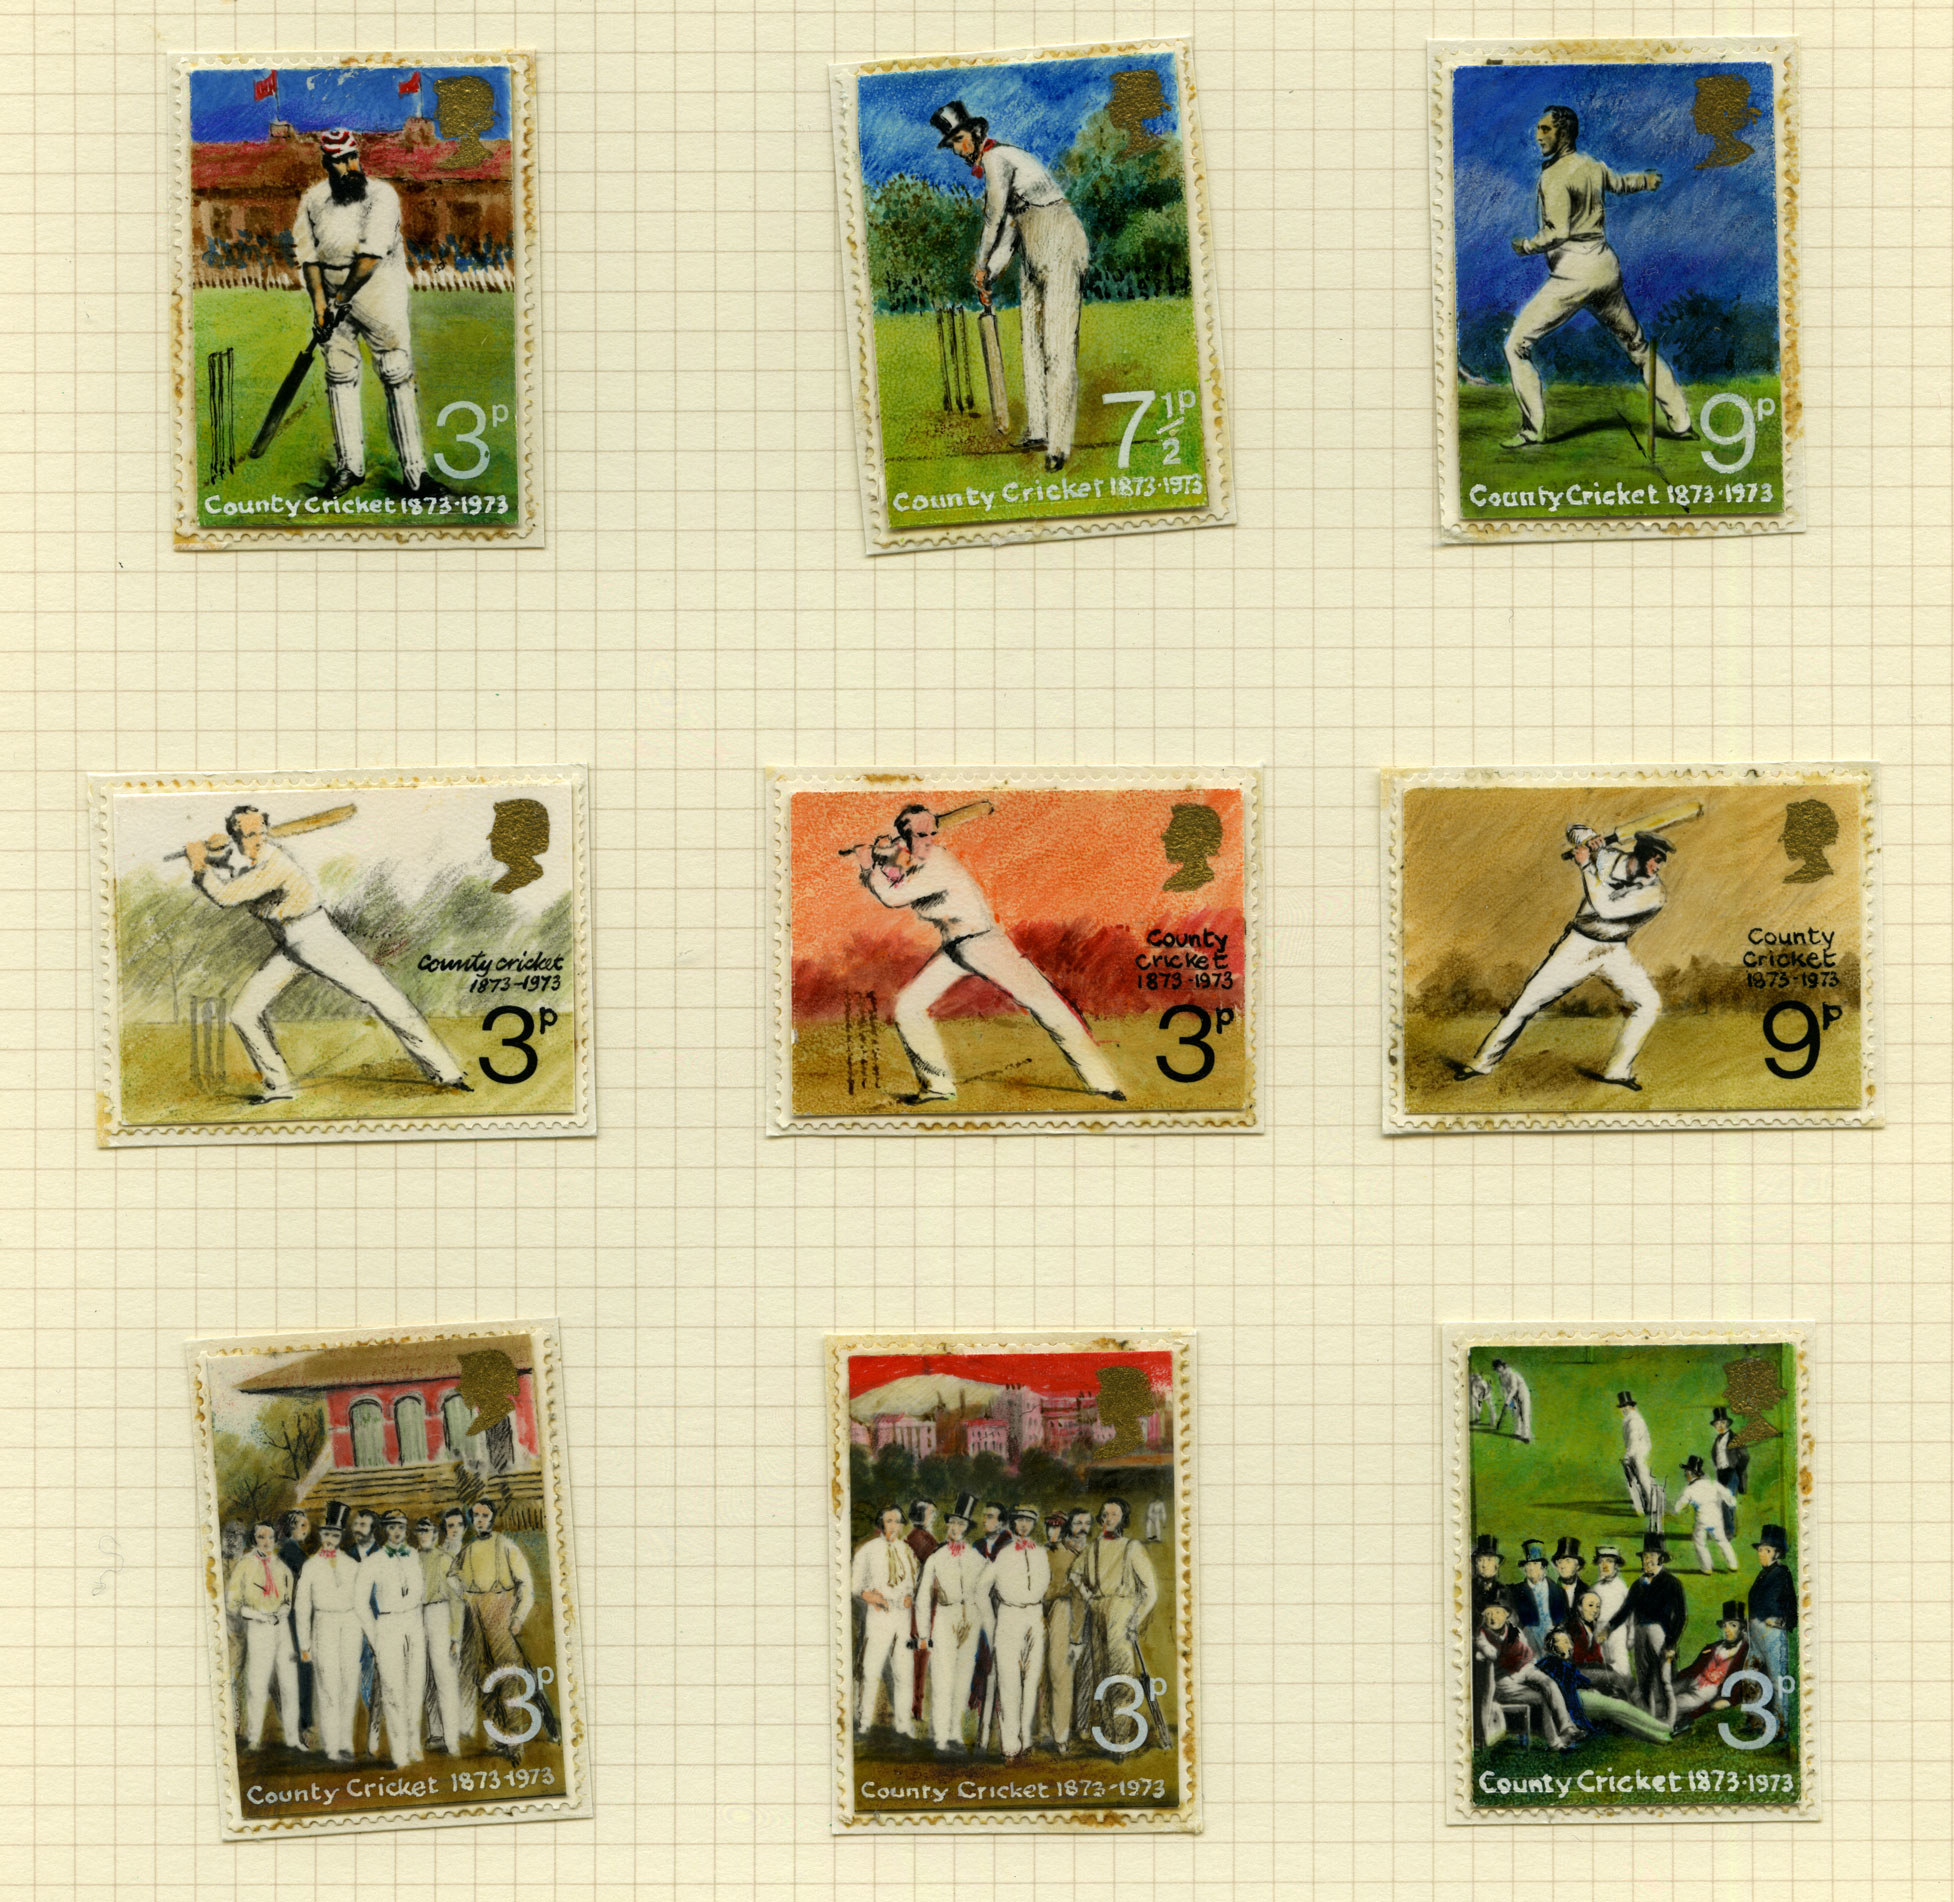 Nine stamp size colour illustrations of cricketers in different positions.